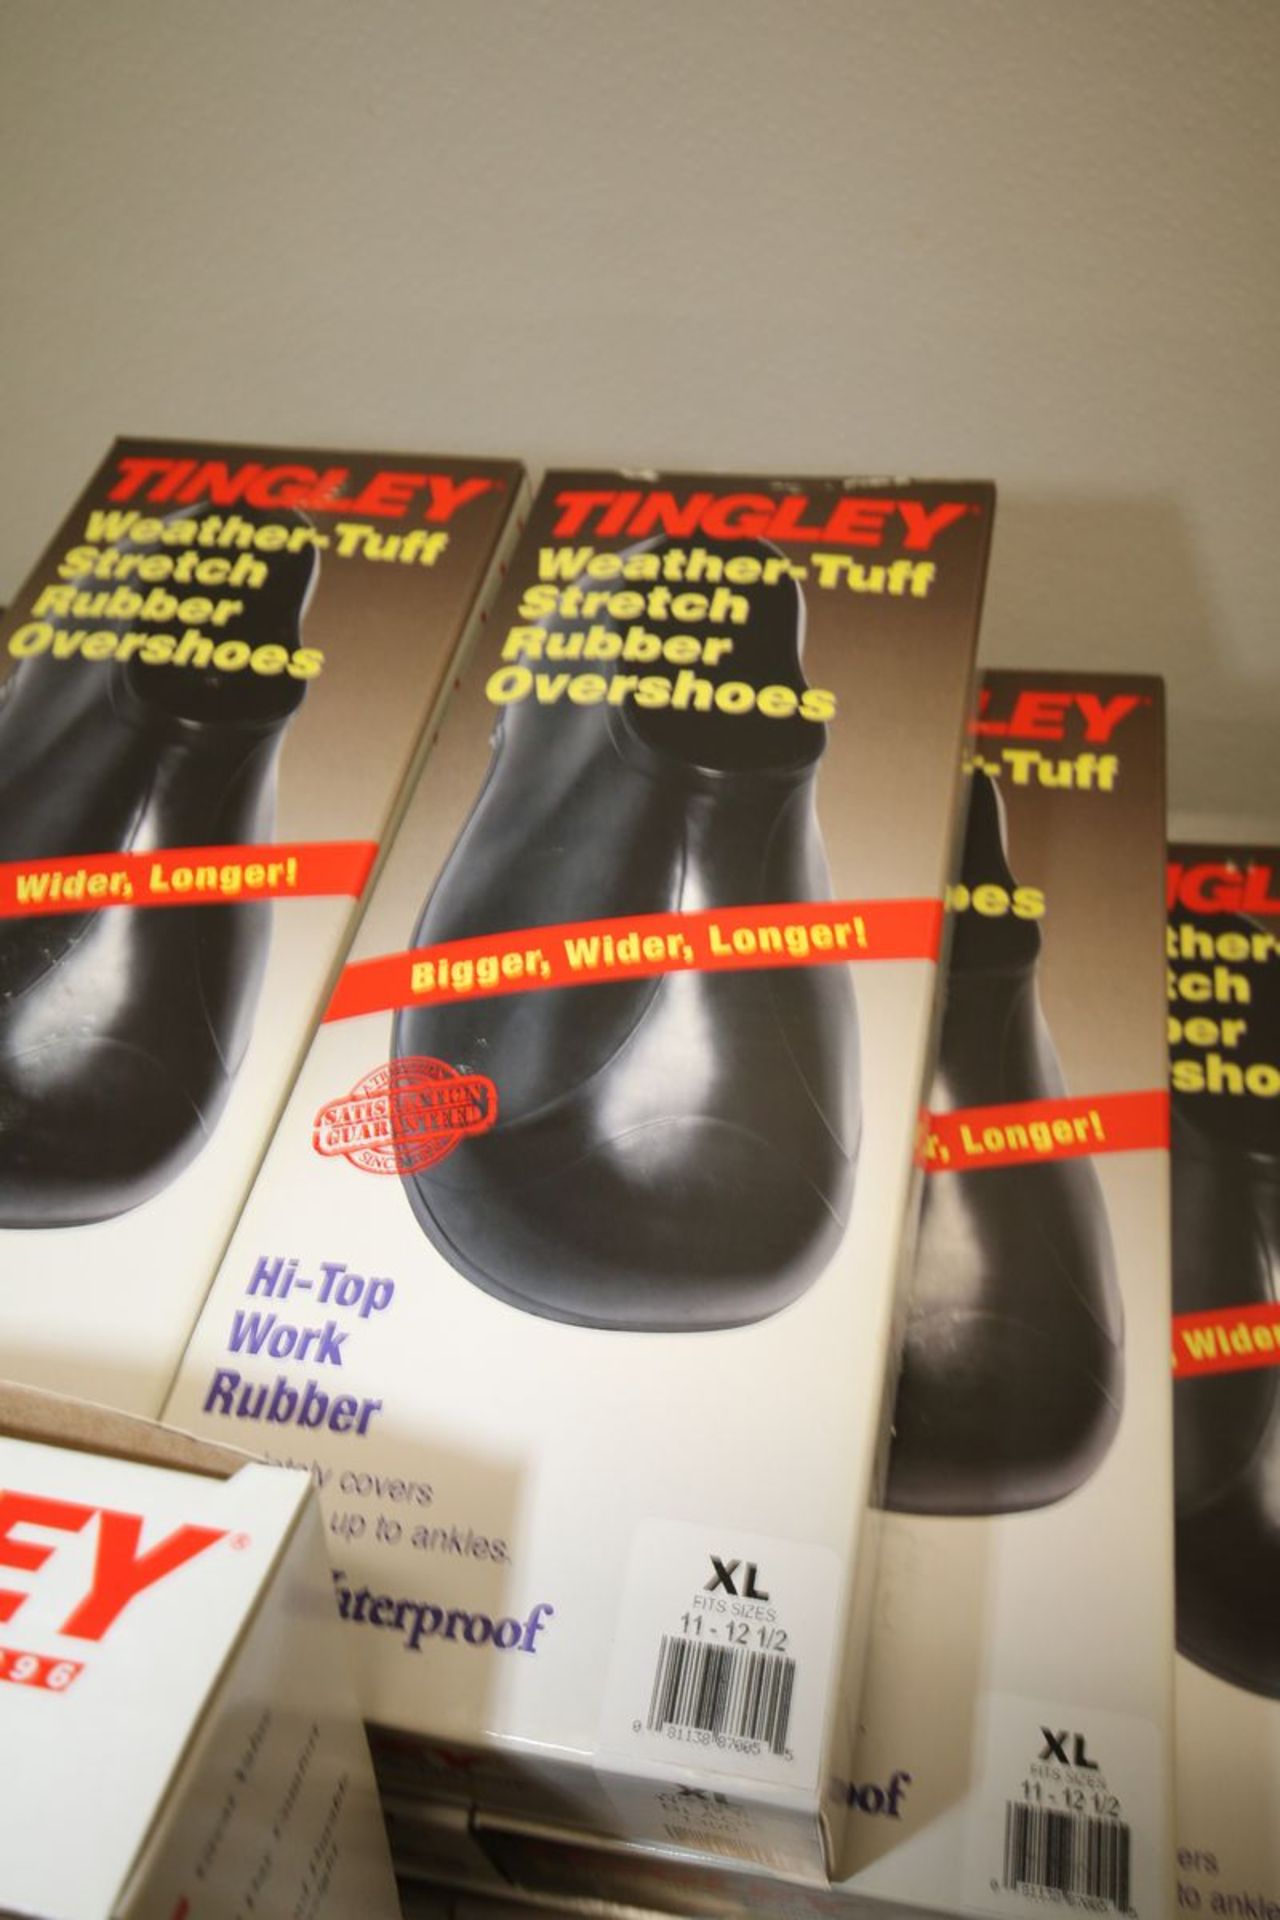 NEW Tingley Hi-Top Work Rubber Overshoes, (4) Medium, (4) Large, and (9) Extra Large - Image 2 of 2